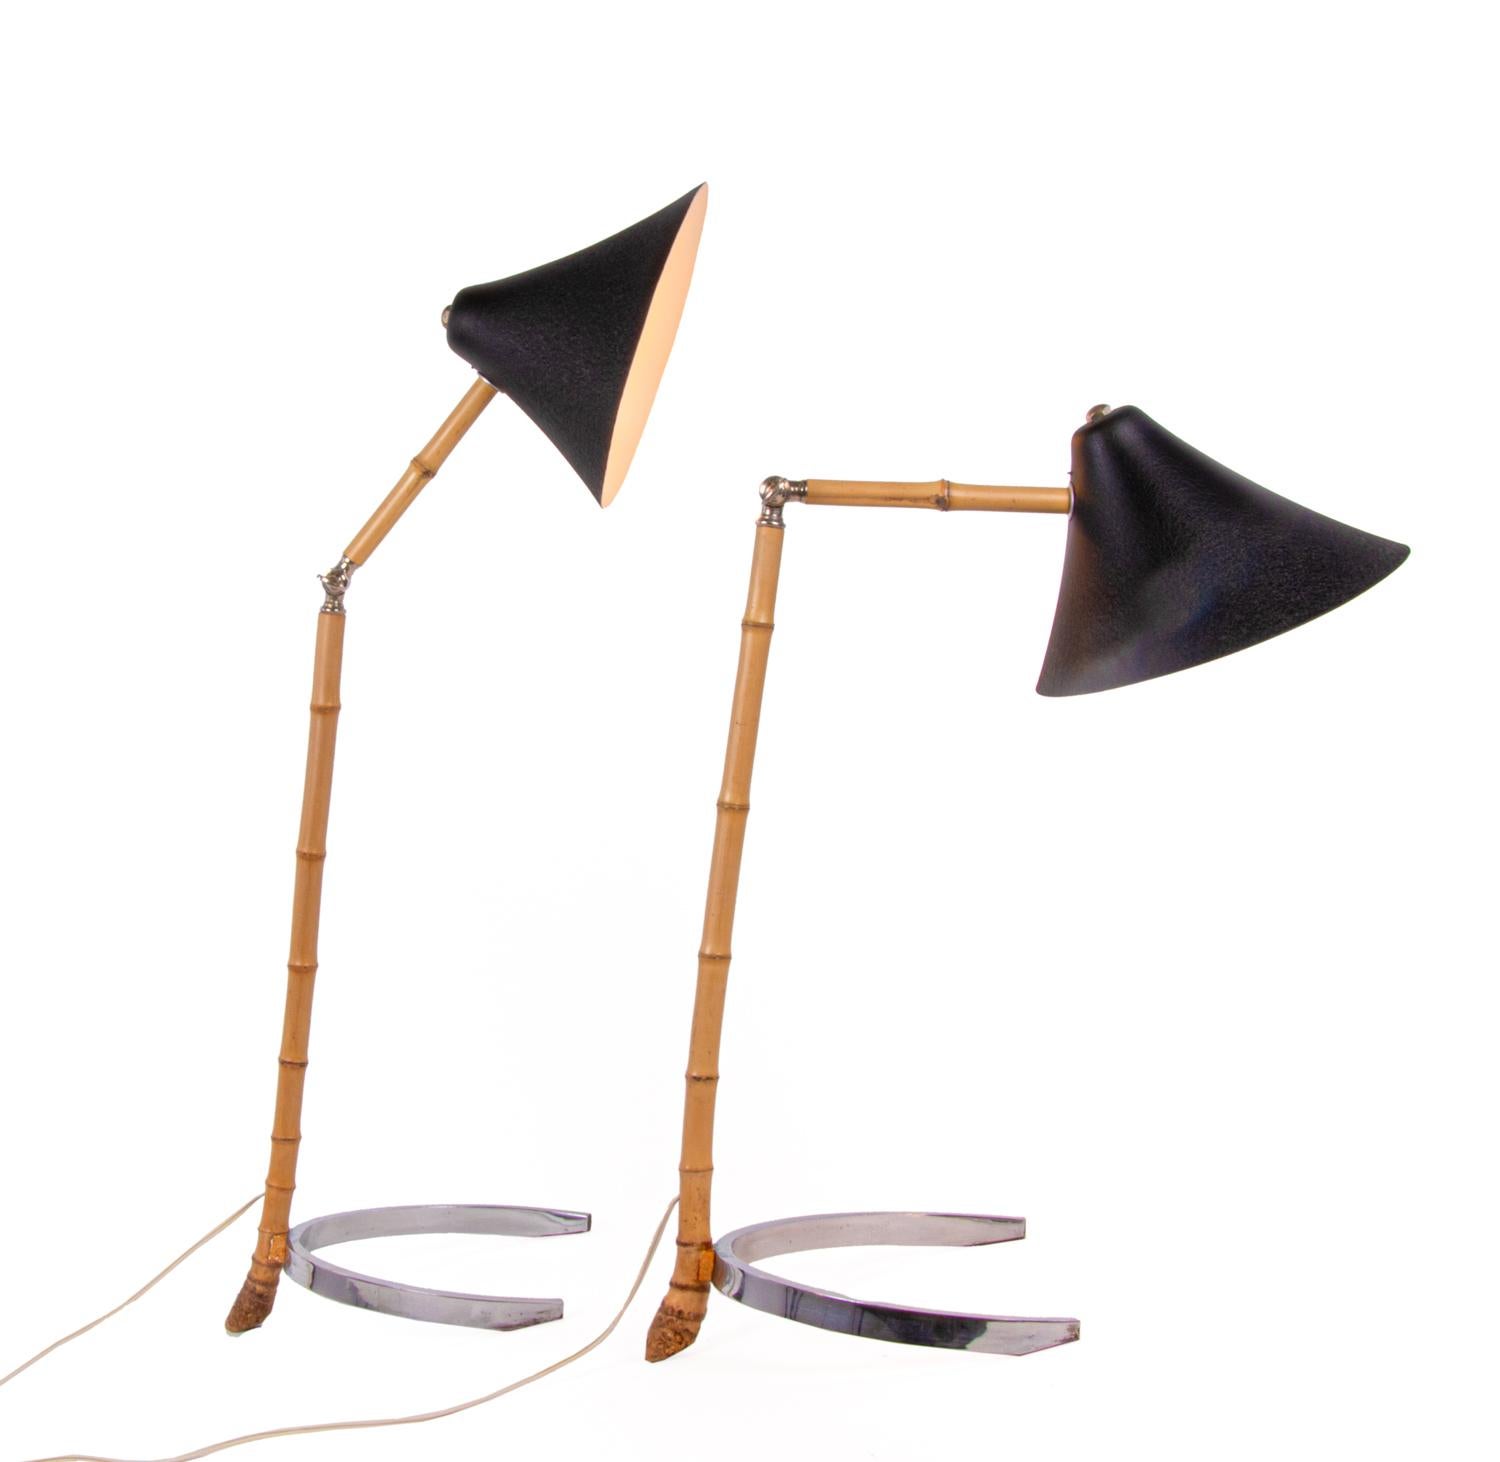 Iconic pair of midcentury articulated table lamps probably from the workshops of Carl Auböck, J. T. Kalmar or Rupert Nikoll in Vienna, Austria. 

The lamps are made of articulated bamboo stems, have horseshoe chrome bases and black shrink lacquered